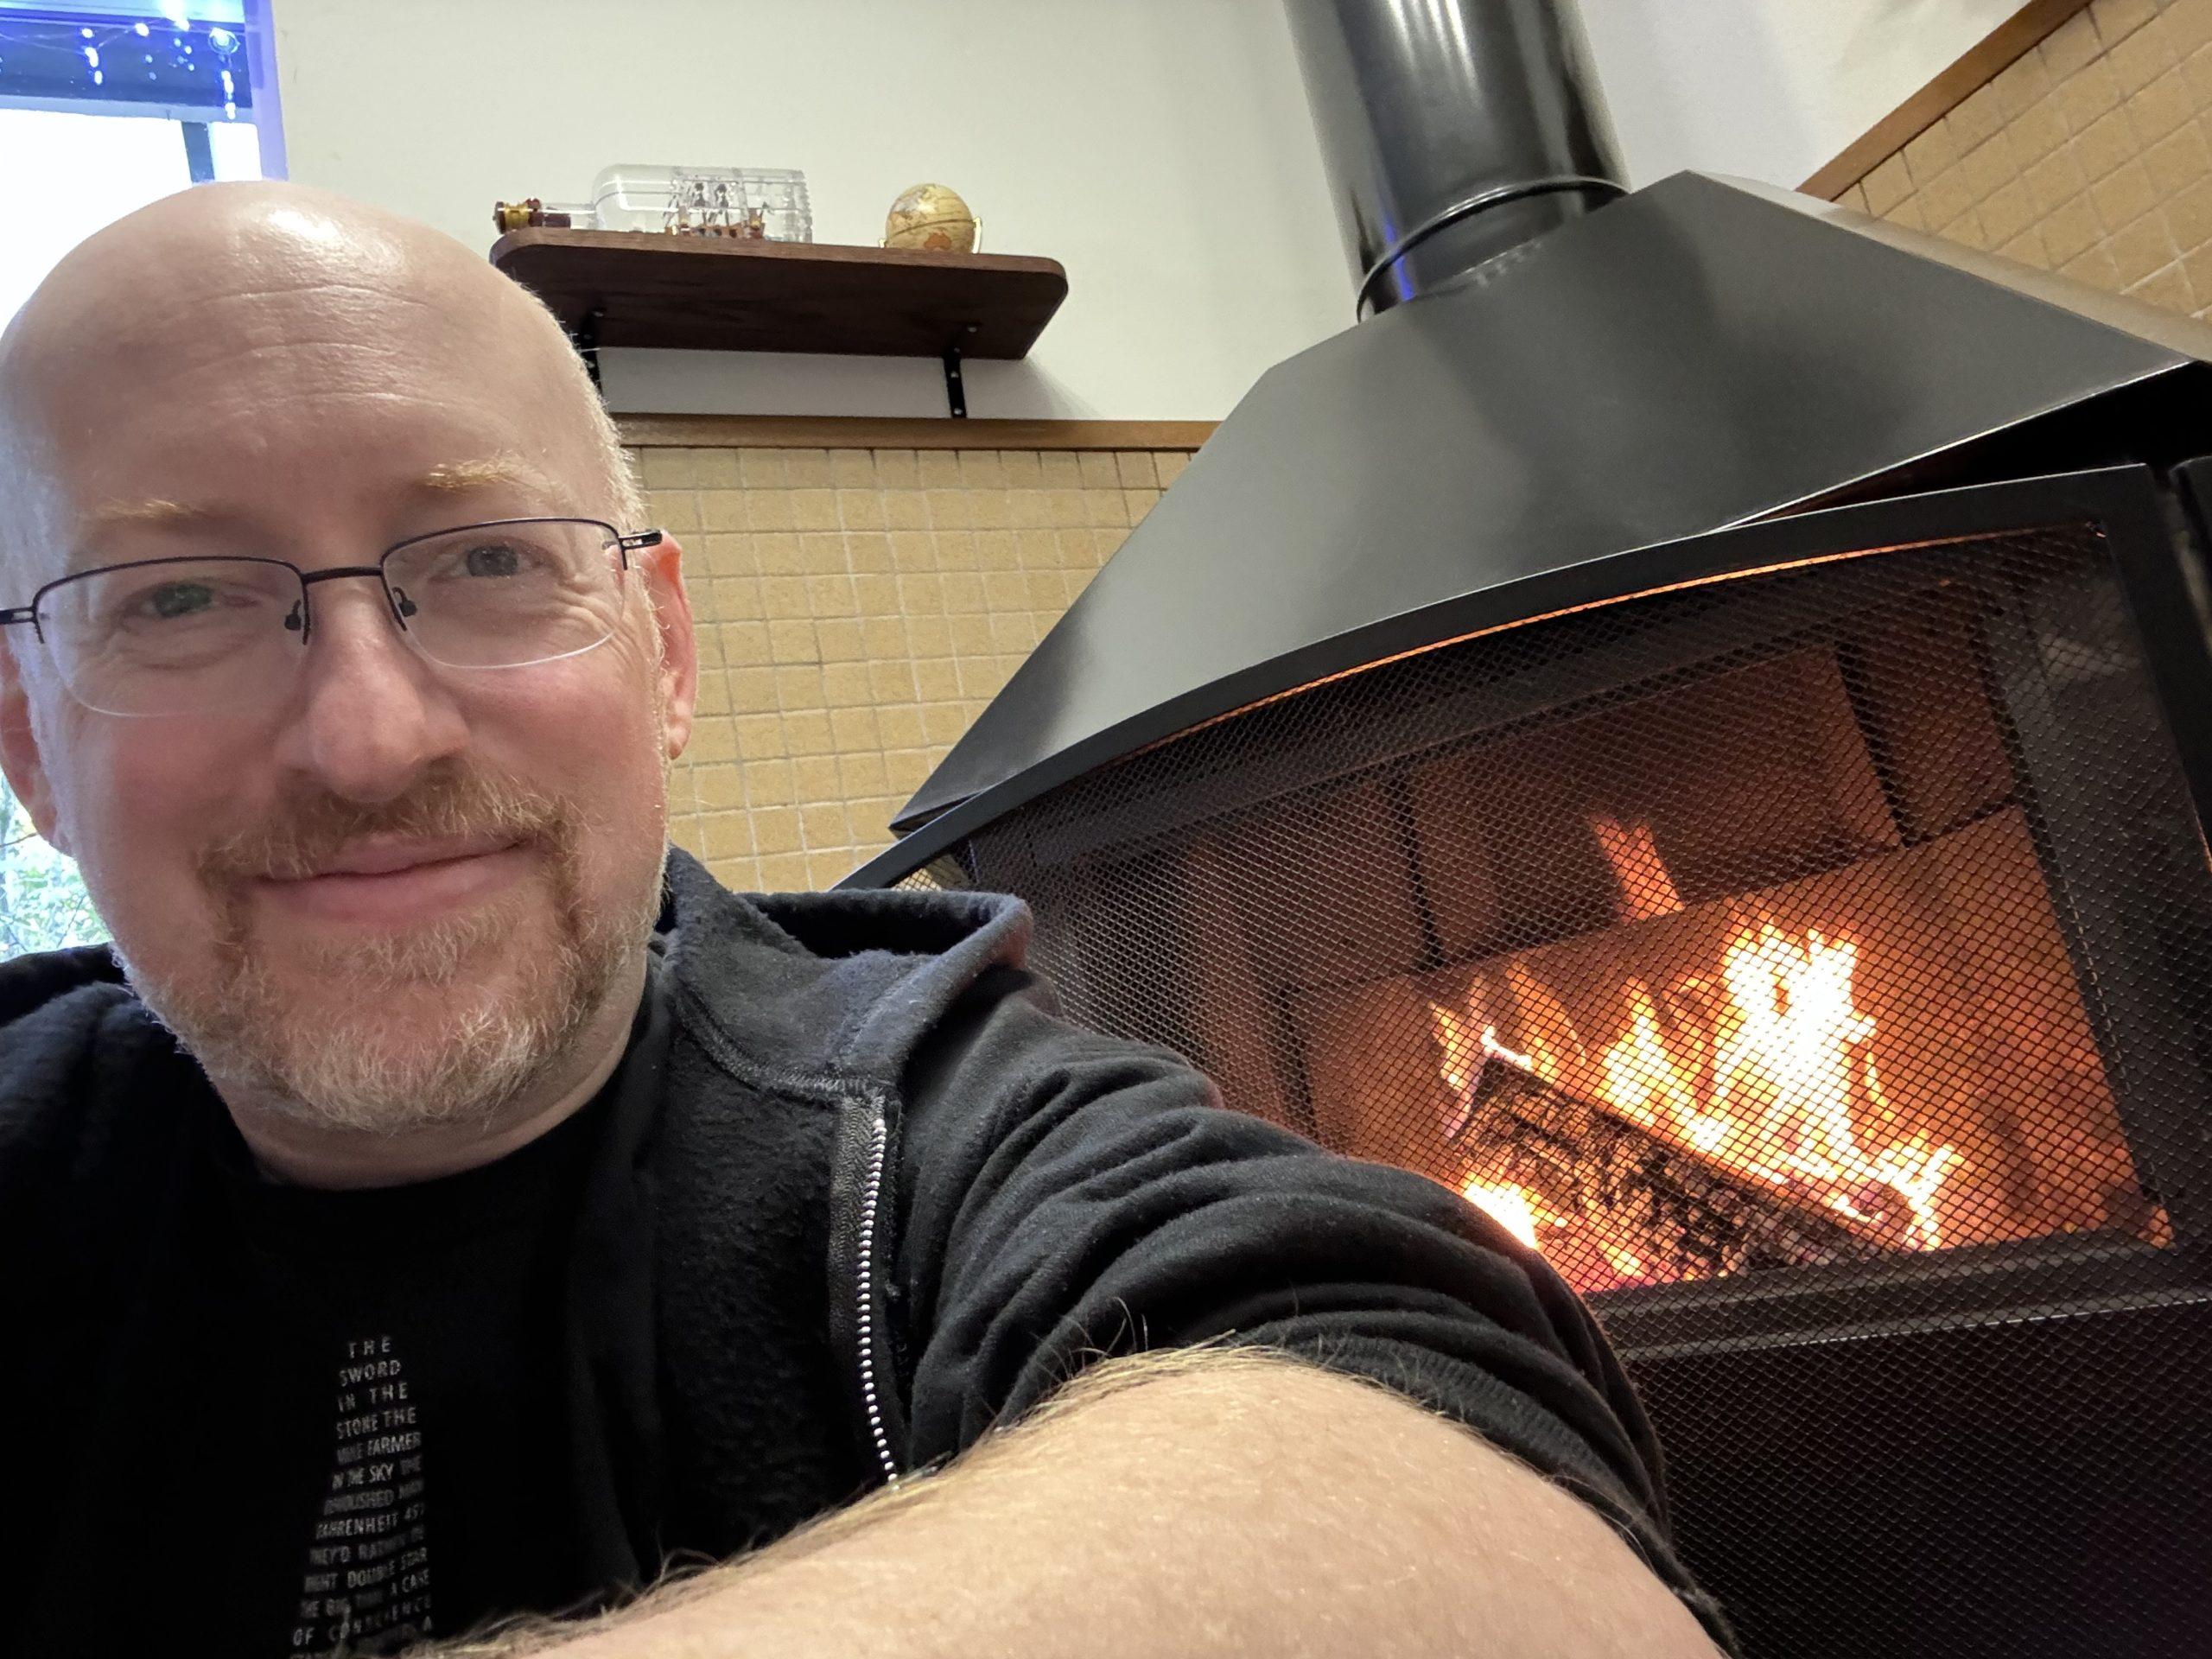 Me sitting in front of a black metal free-standing fireplace in the corner of our living room; logs are burning in the fireplace.